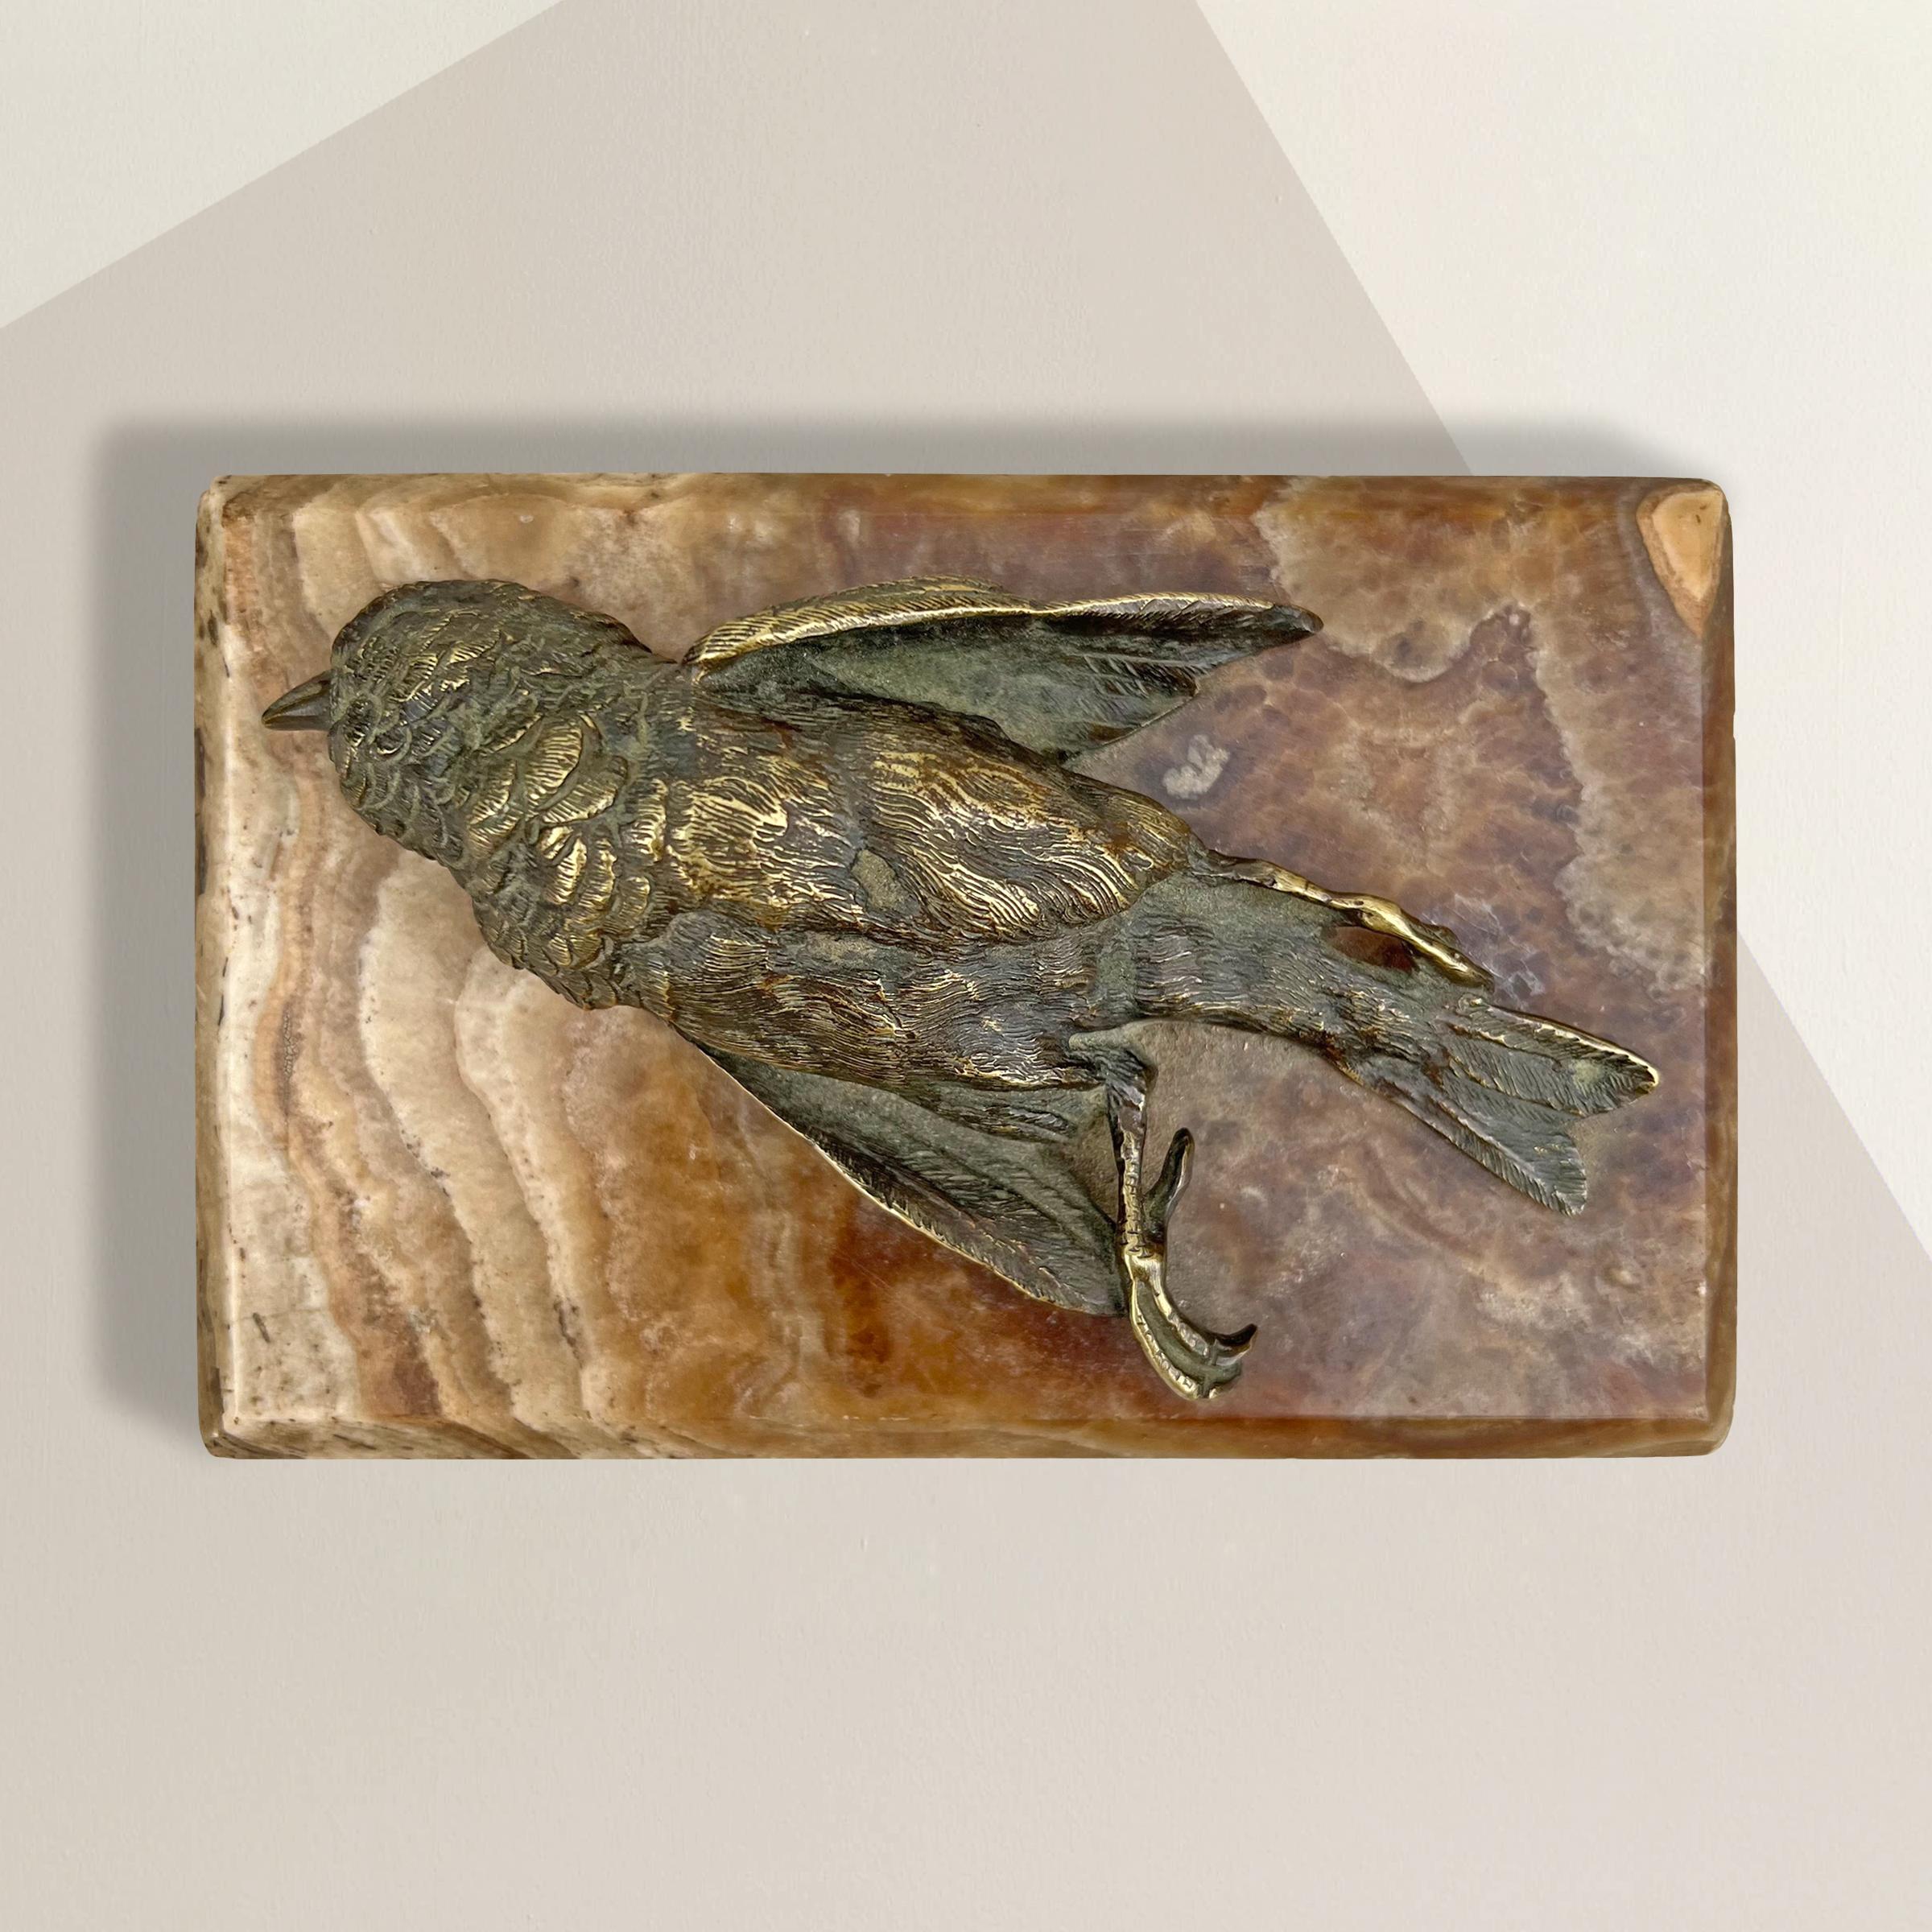 A striking and thought-provoking 19th century French cast bronze Memento Mori figure depicting a dead finch resting on an onyx pedestal. Memento Mori appear morbid but, in fact, were intended to be reminders of how fleeting life is, and how one